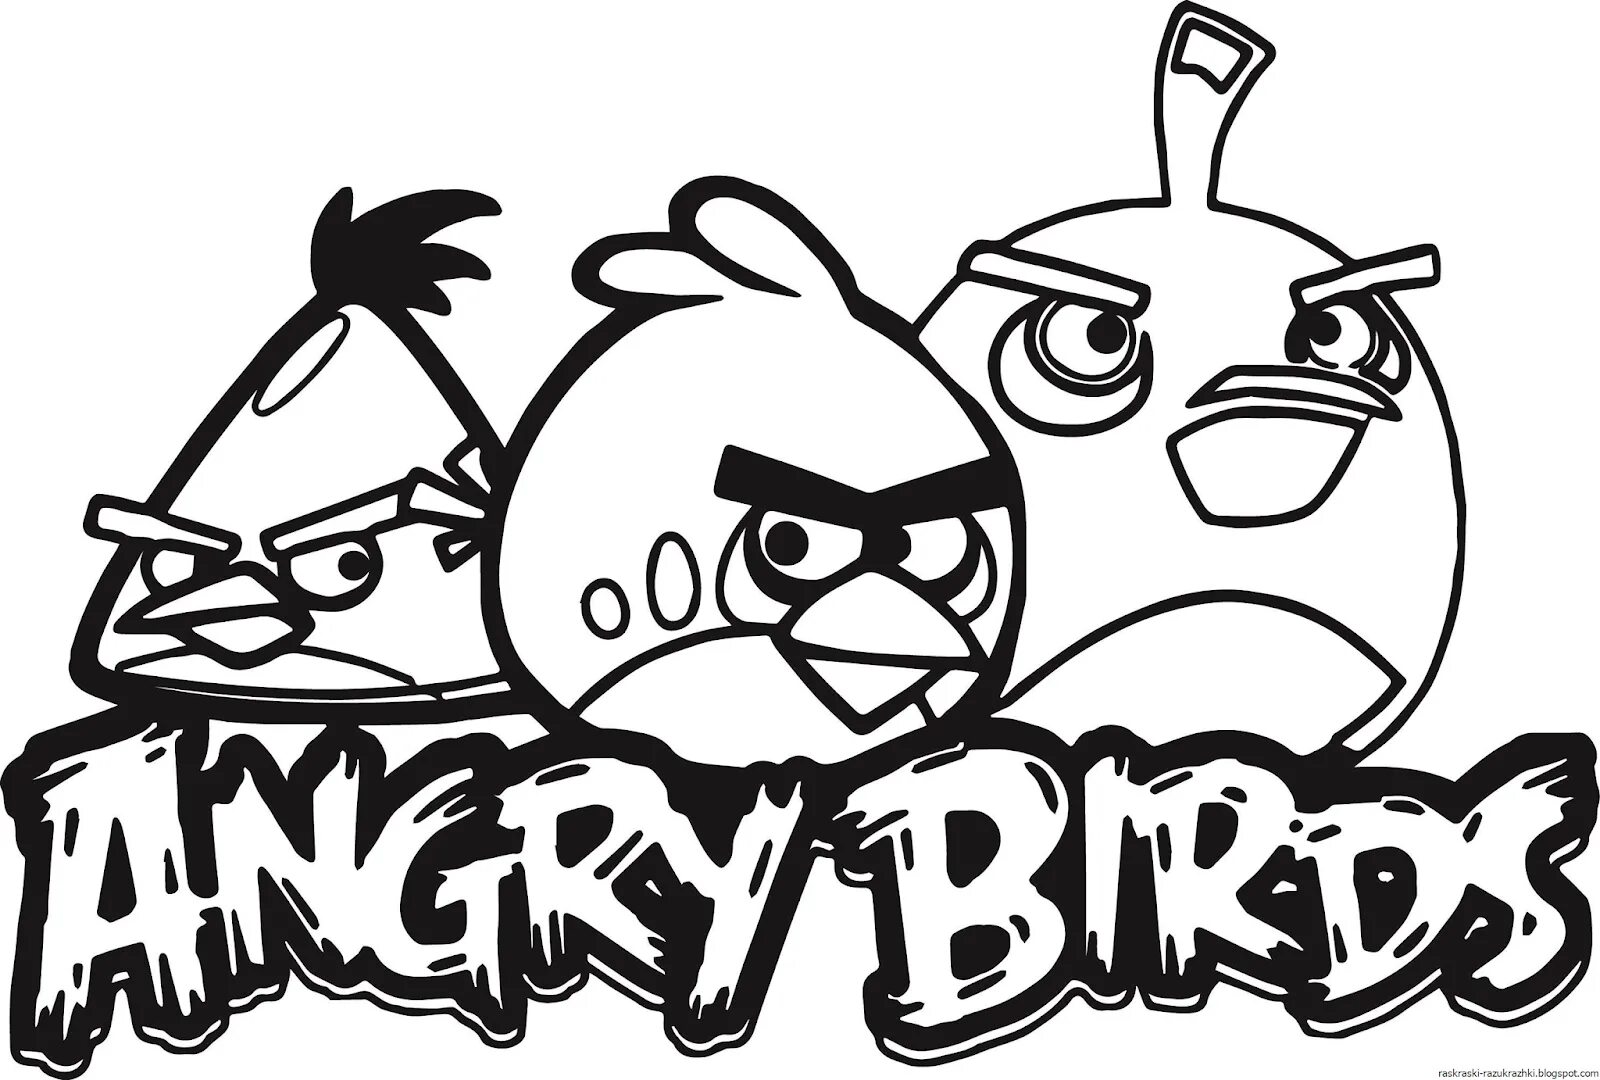 Angry birds for kids #23